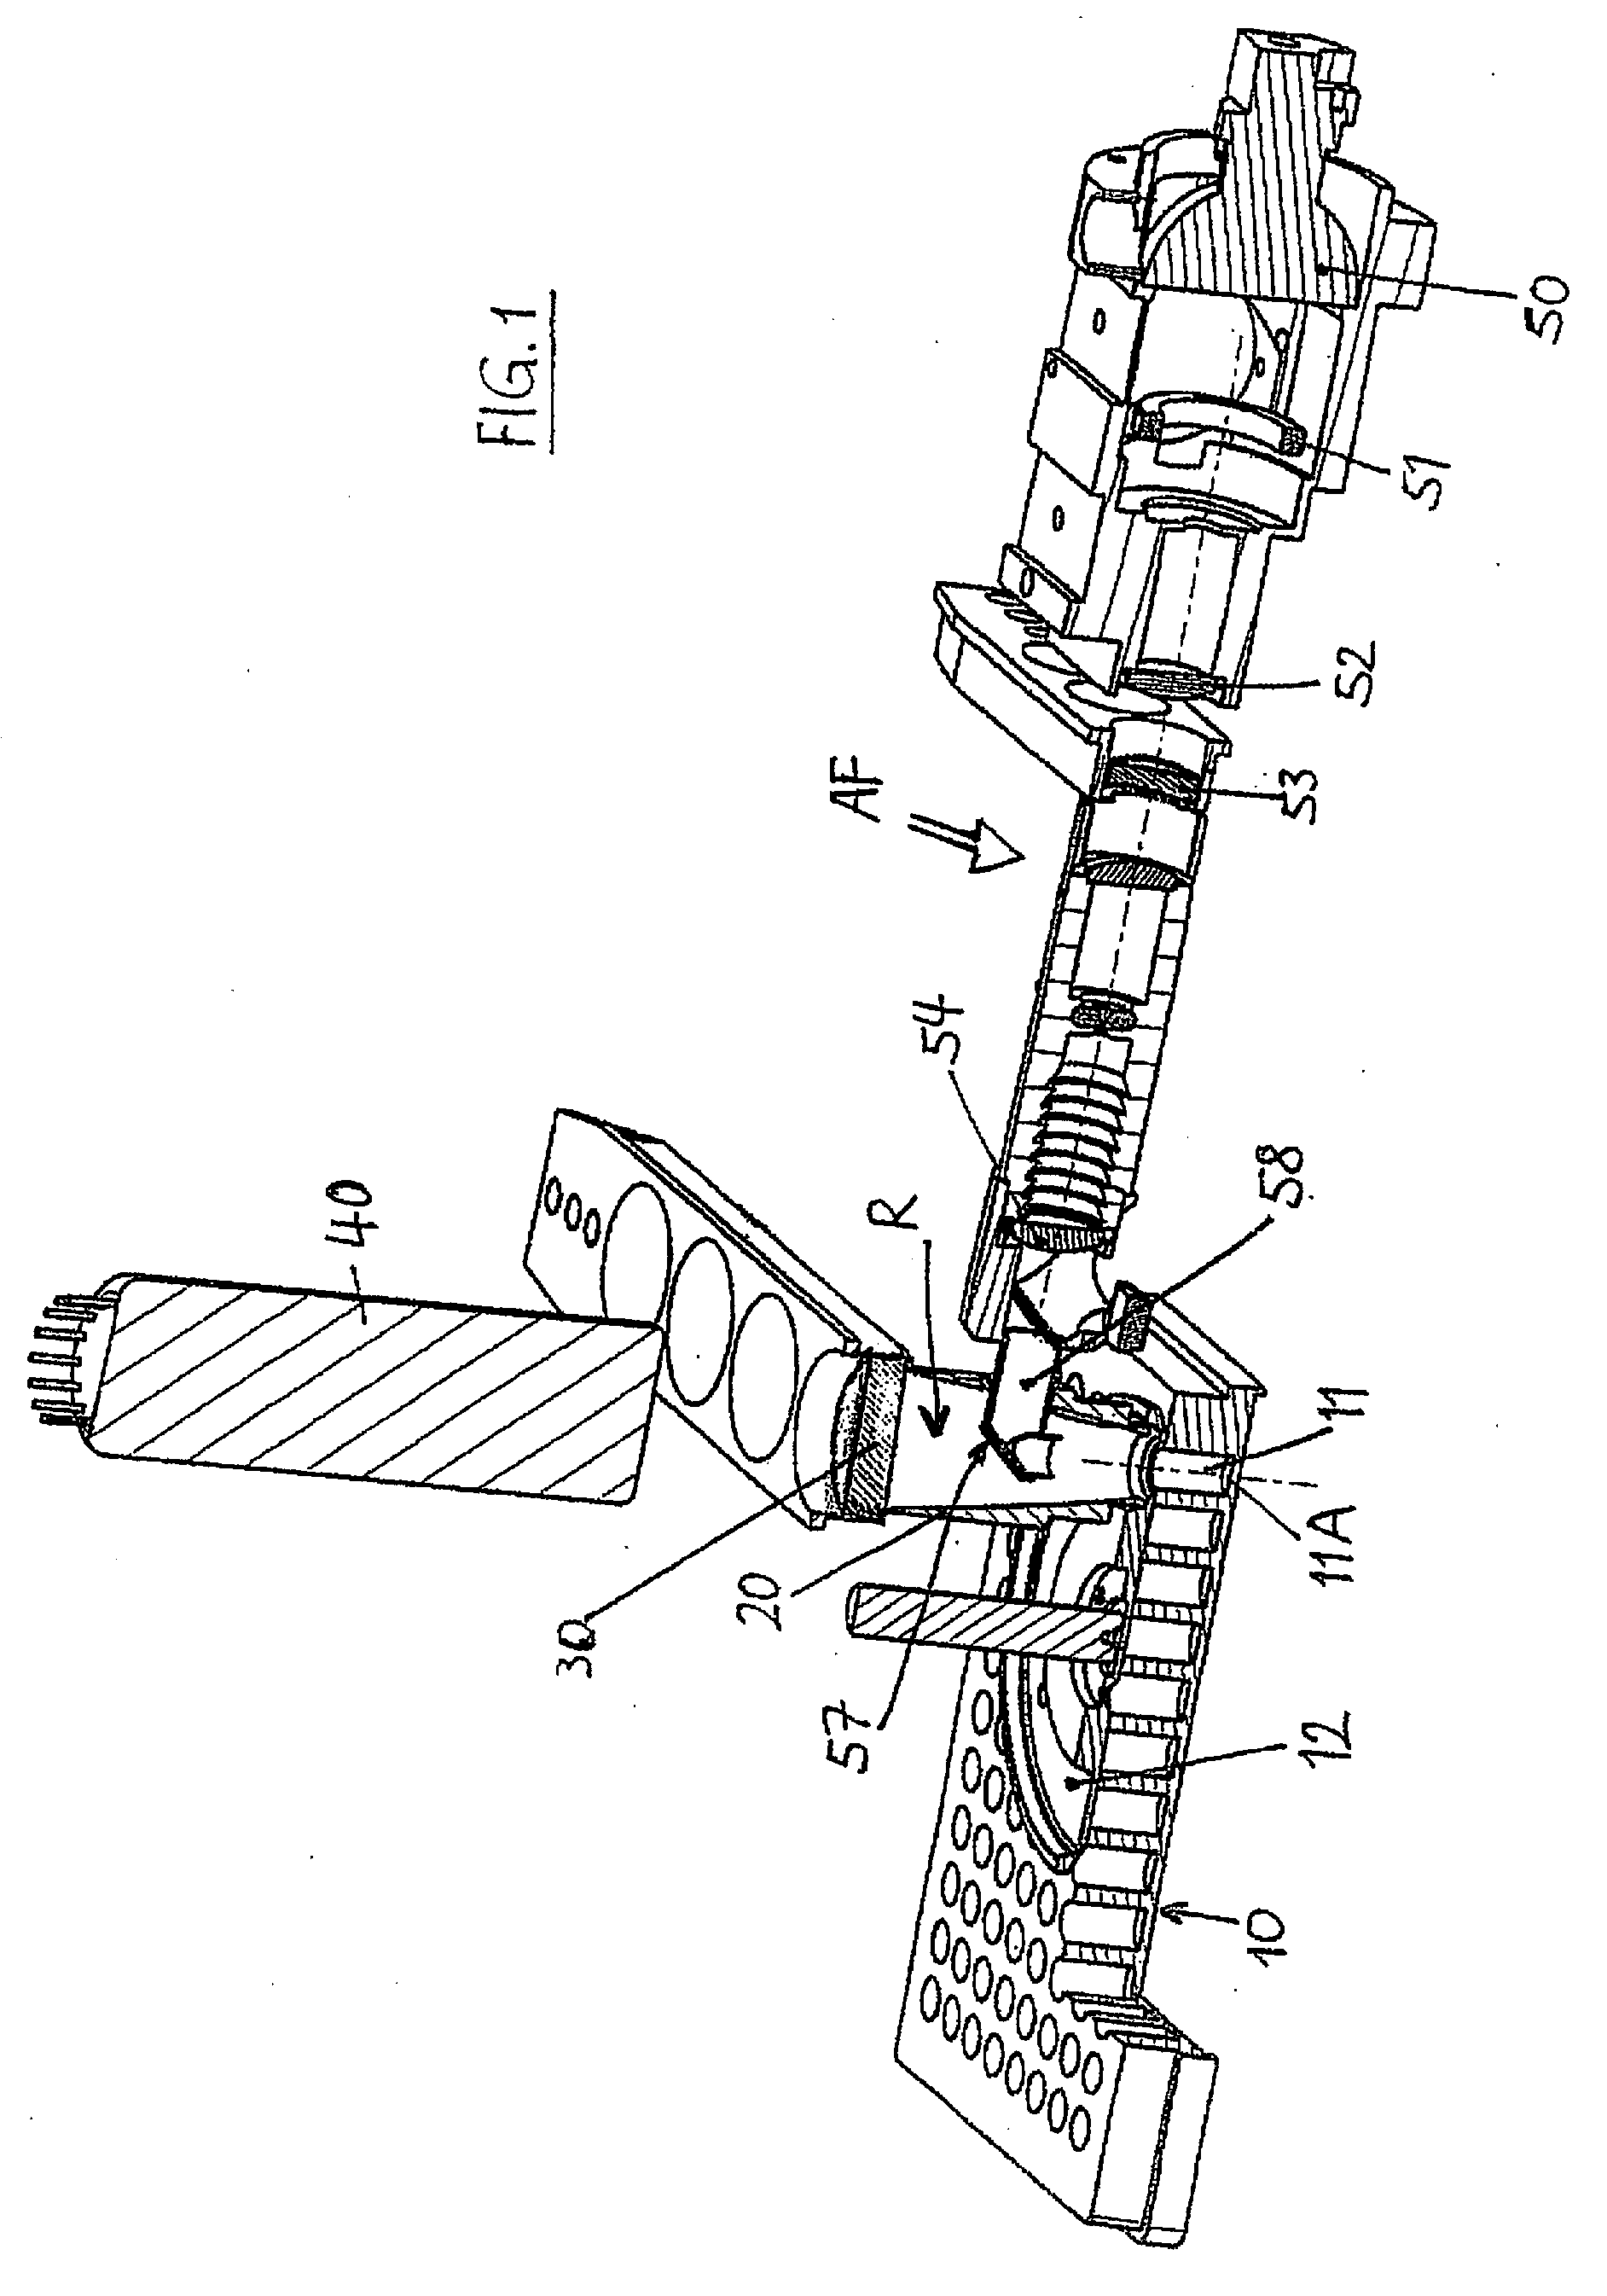 Apparatus for selected measurement of, in particular luminescent and/or fluorescent radiation